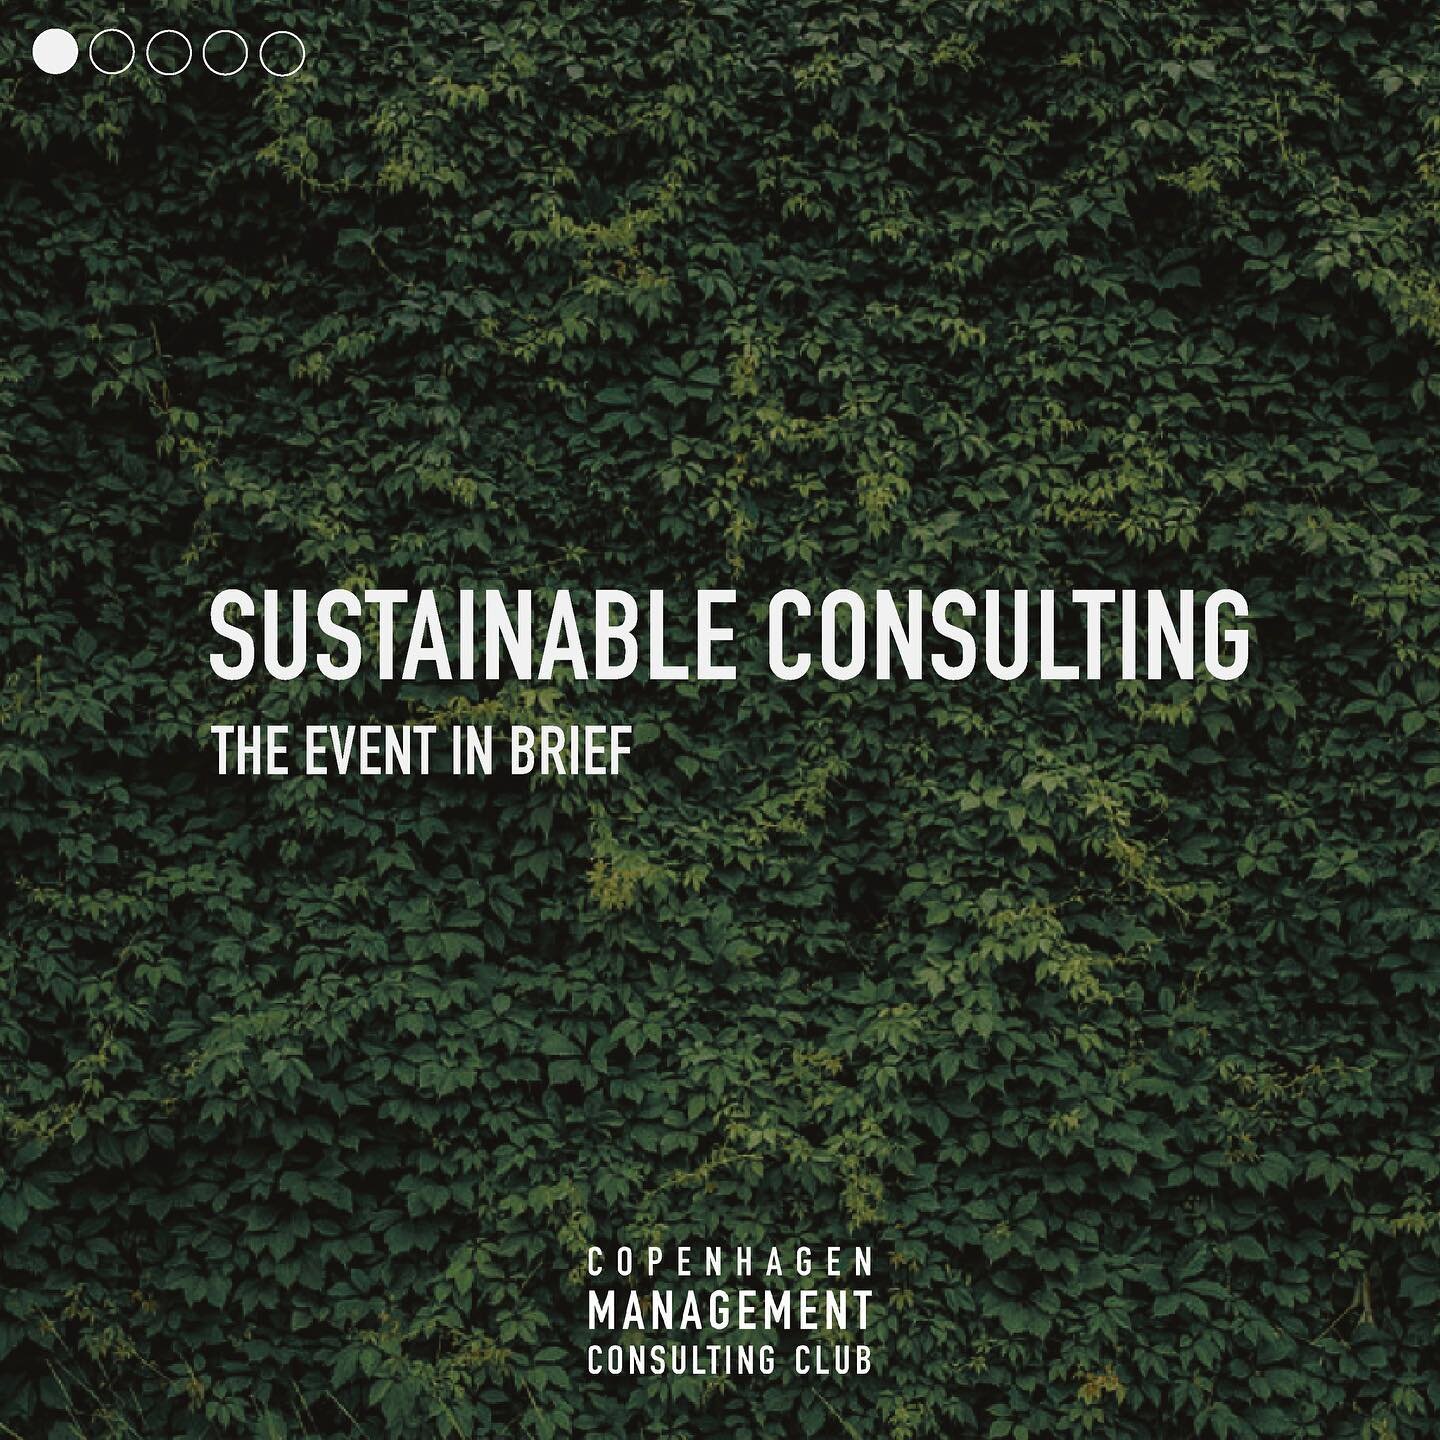 Sign up now for our next event on sustainable consulting 🌱